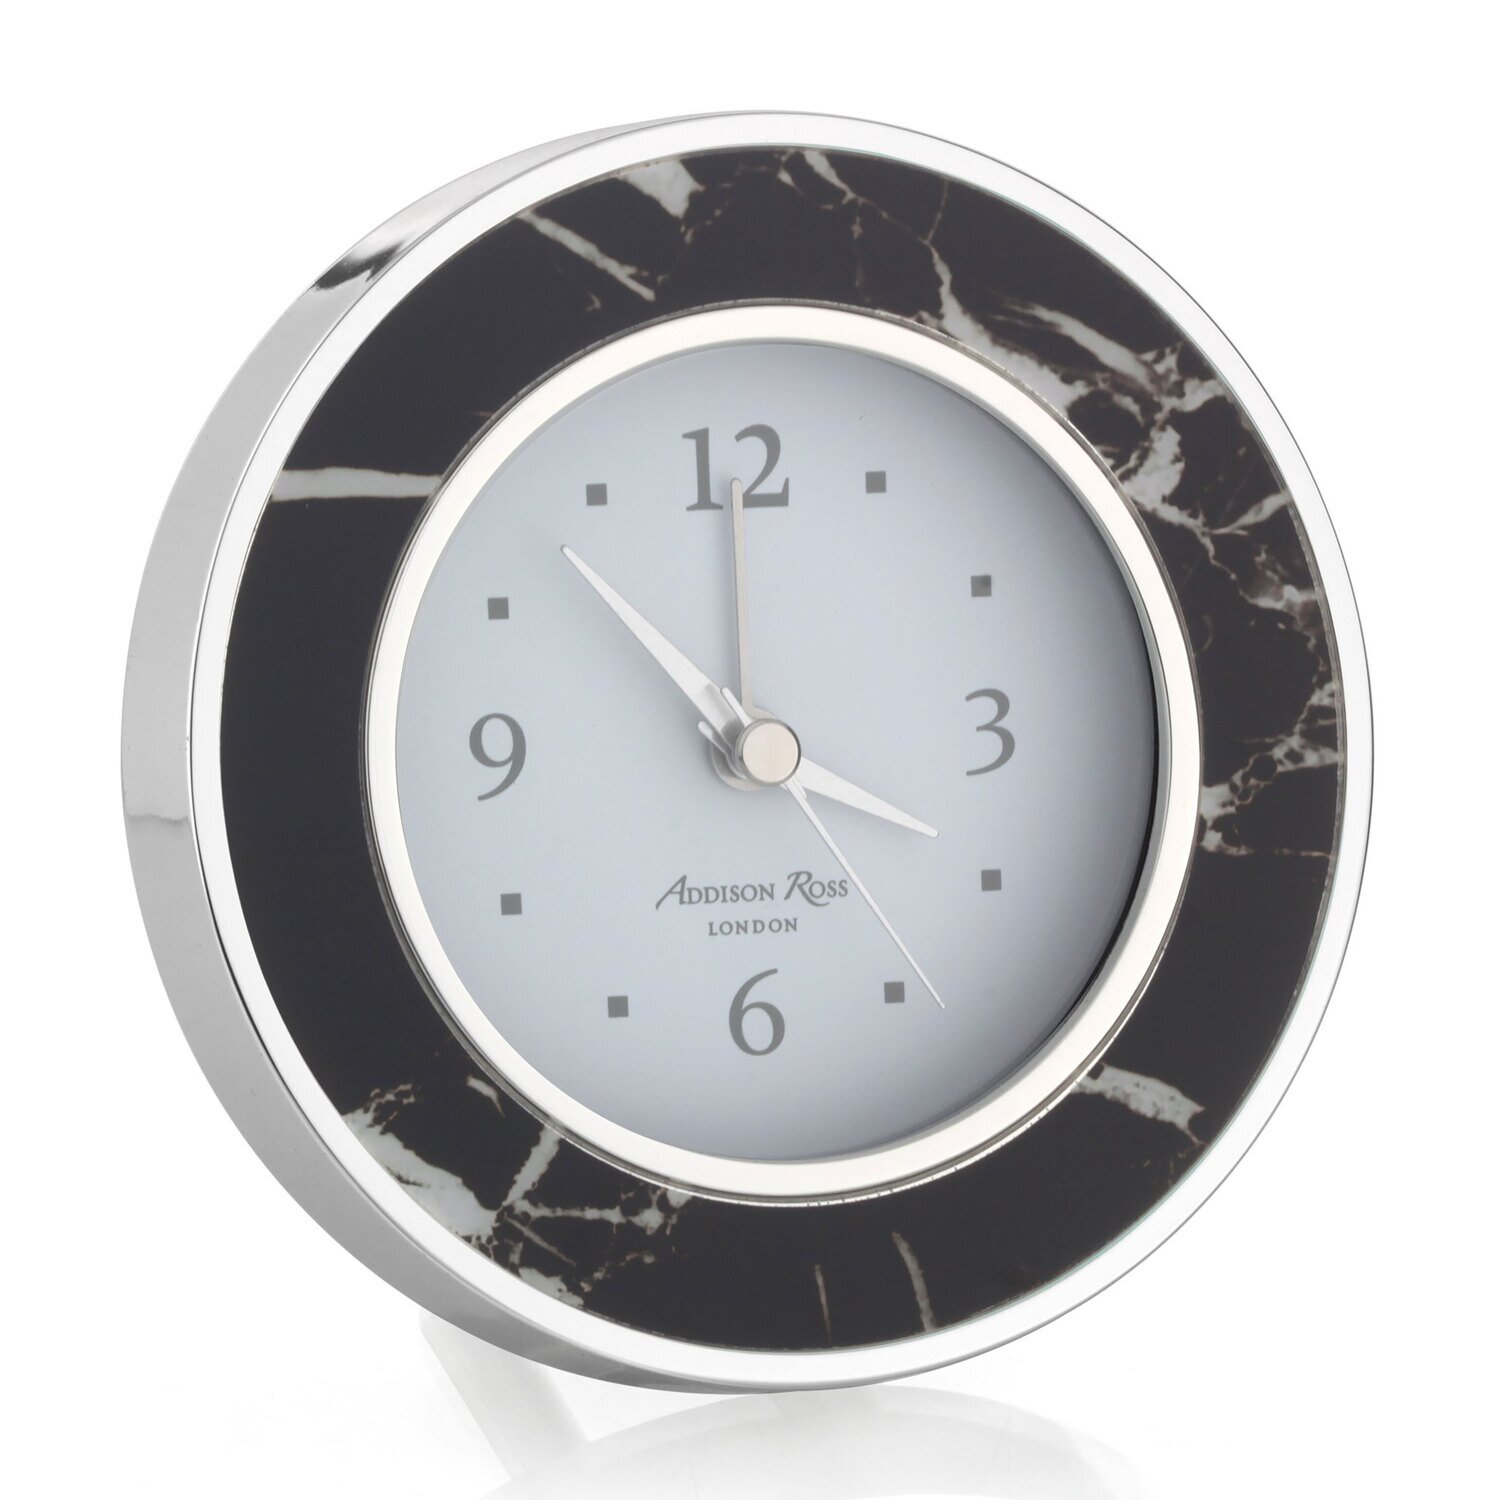 Addison Ross Black Marble Silver Alarm Clock 4 x 4 InchSilver-plated FR5515